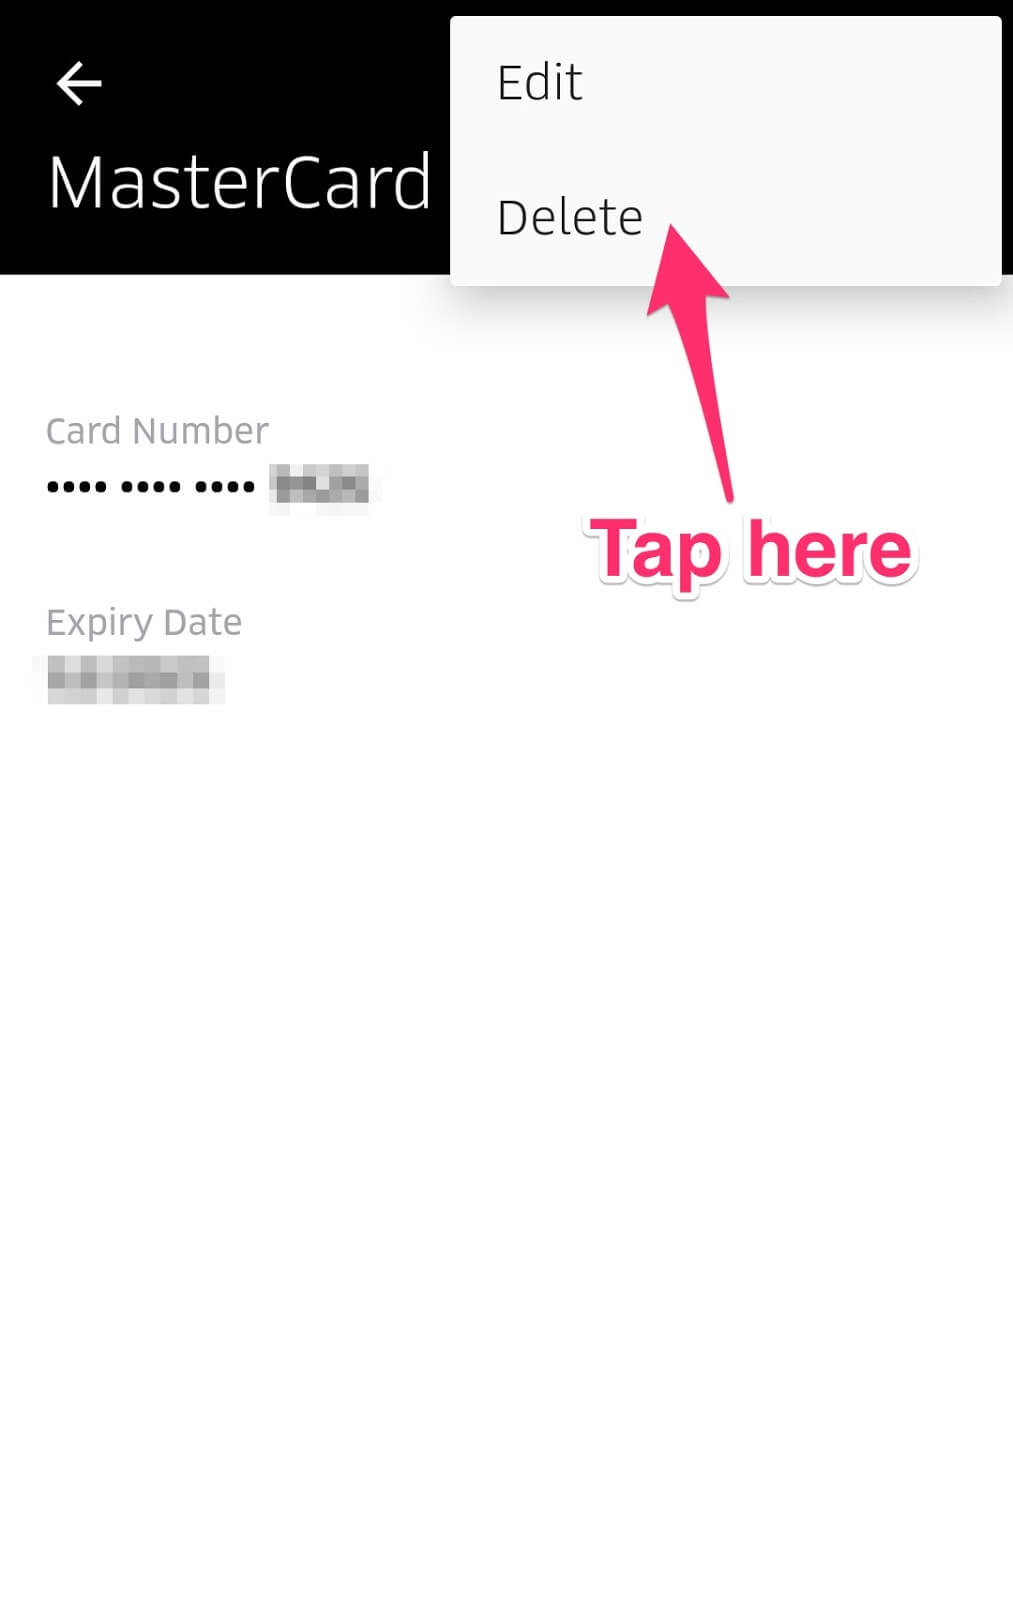 How to Remove Your Credit Card from Uber: tap here to delete